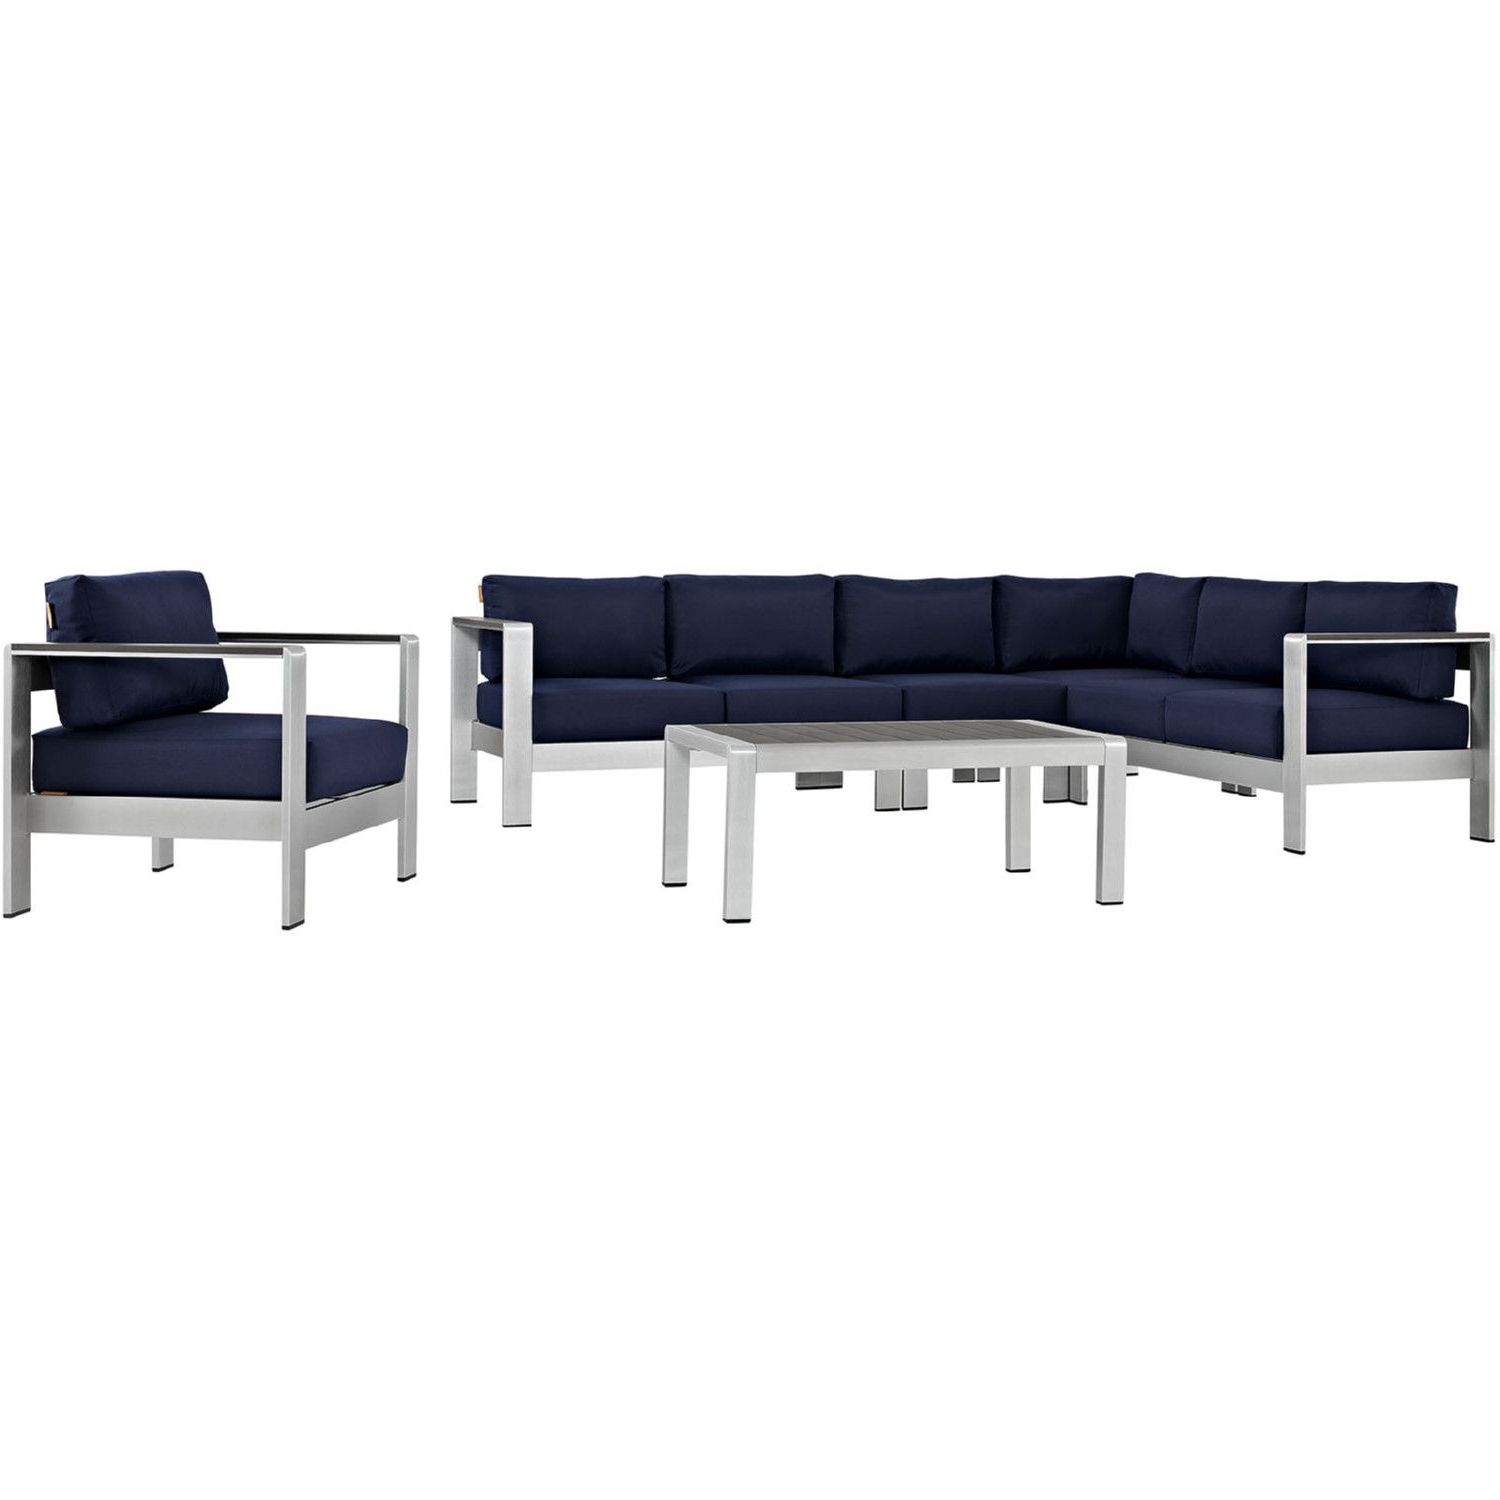 Navy Outdoor Seating Sectional Patio Sets Pertaining To Popular Modway Eei 2558 Slv Nav Shore 6 Piece Outdoor Patio Aluminum Sectional (View 9 of 15)